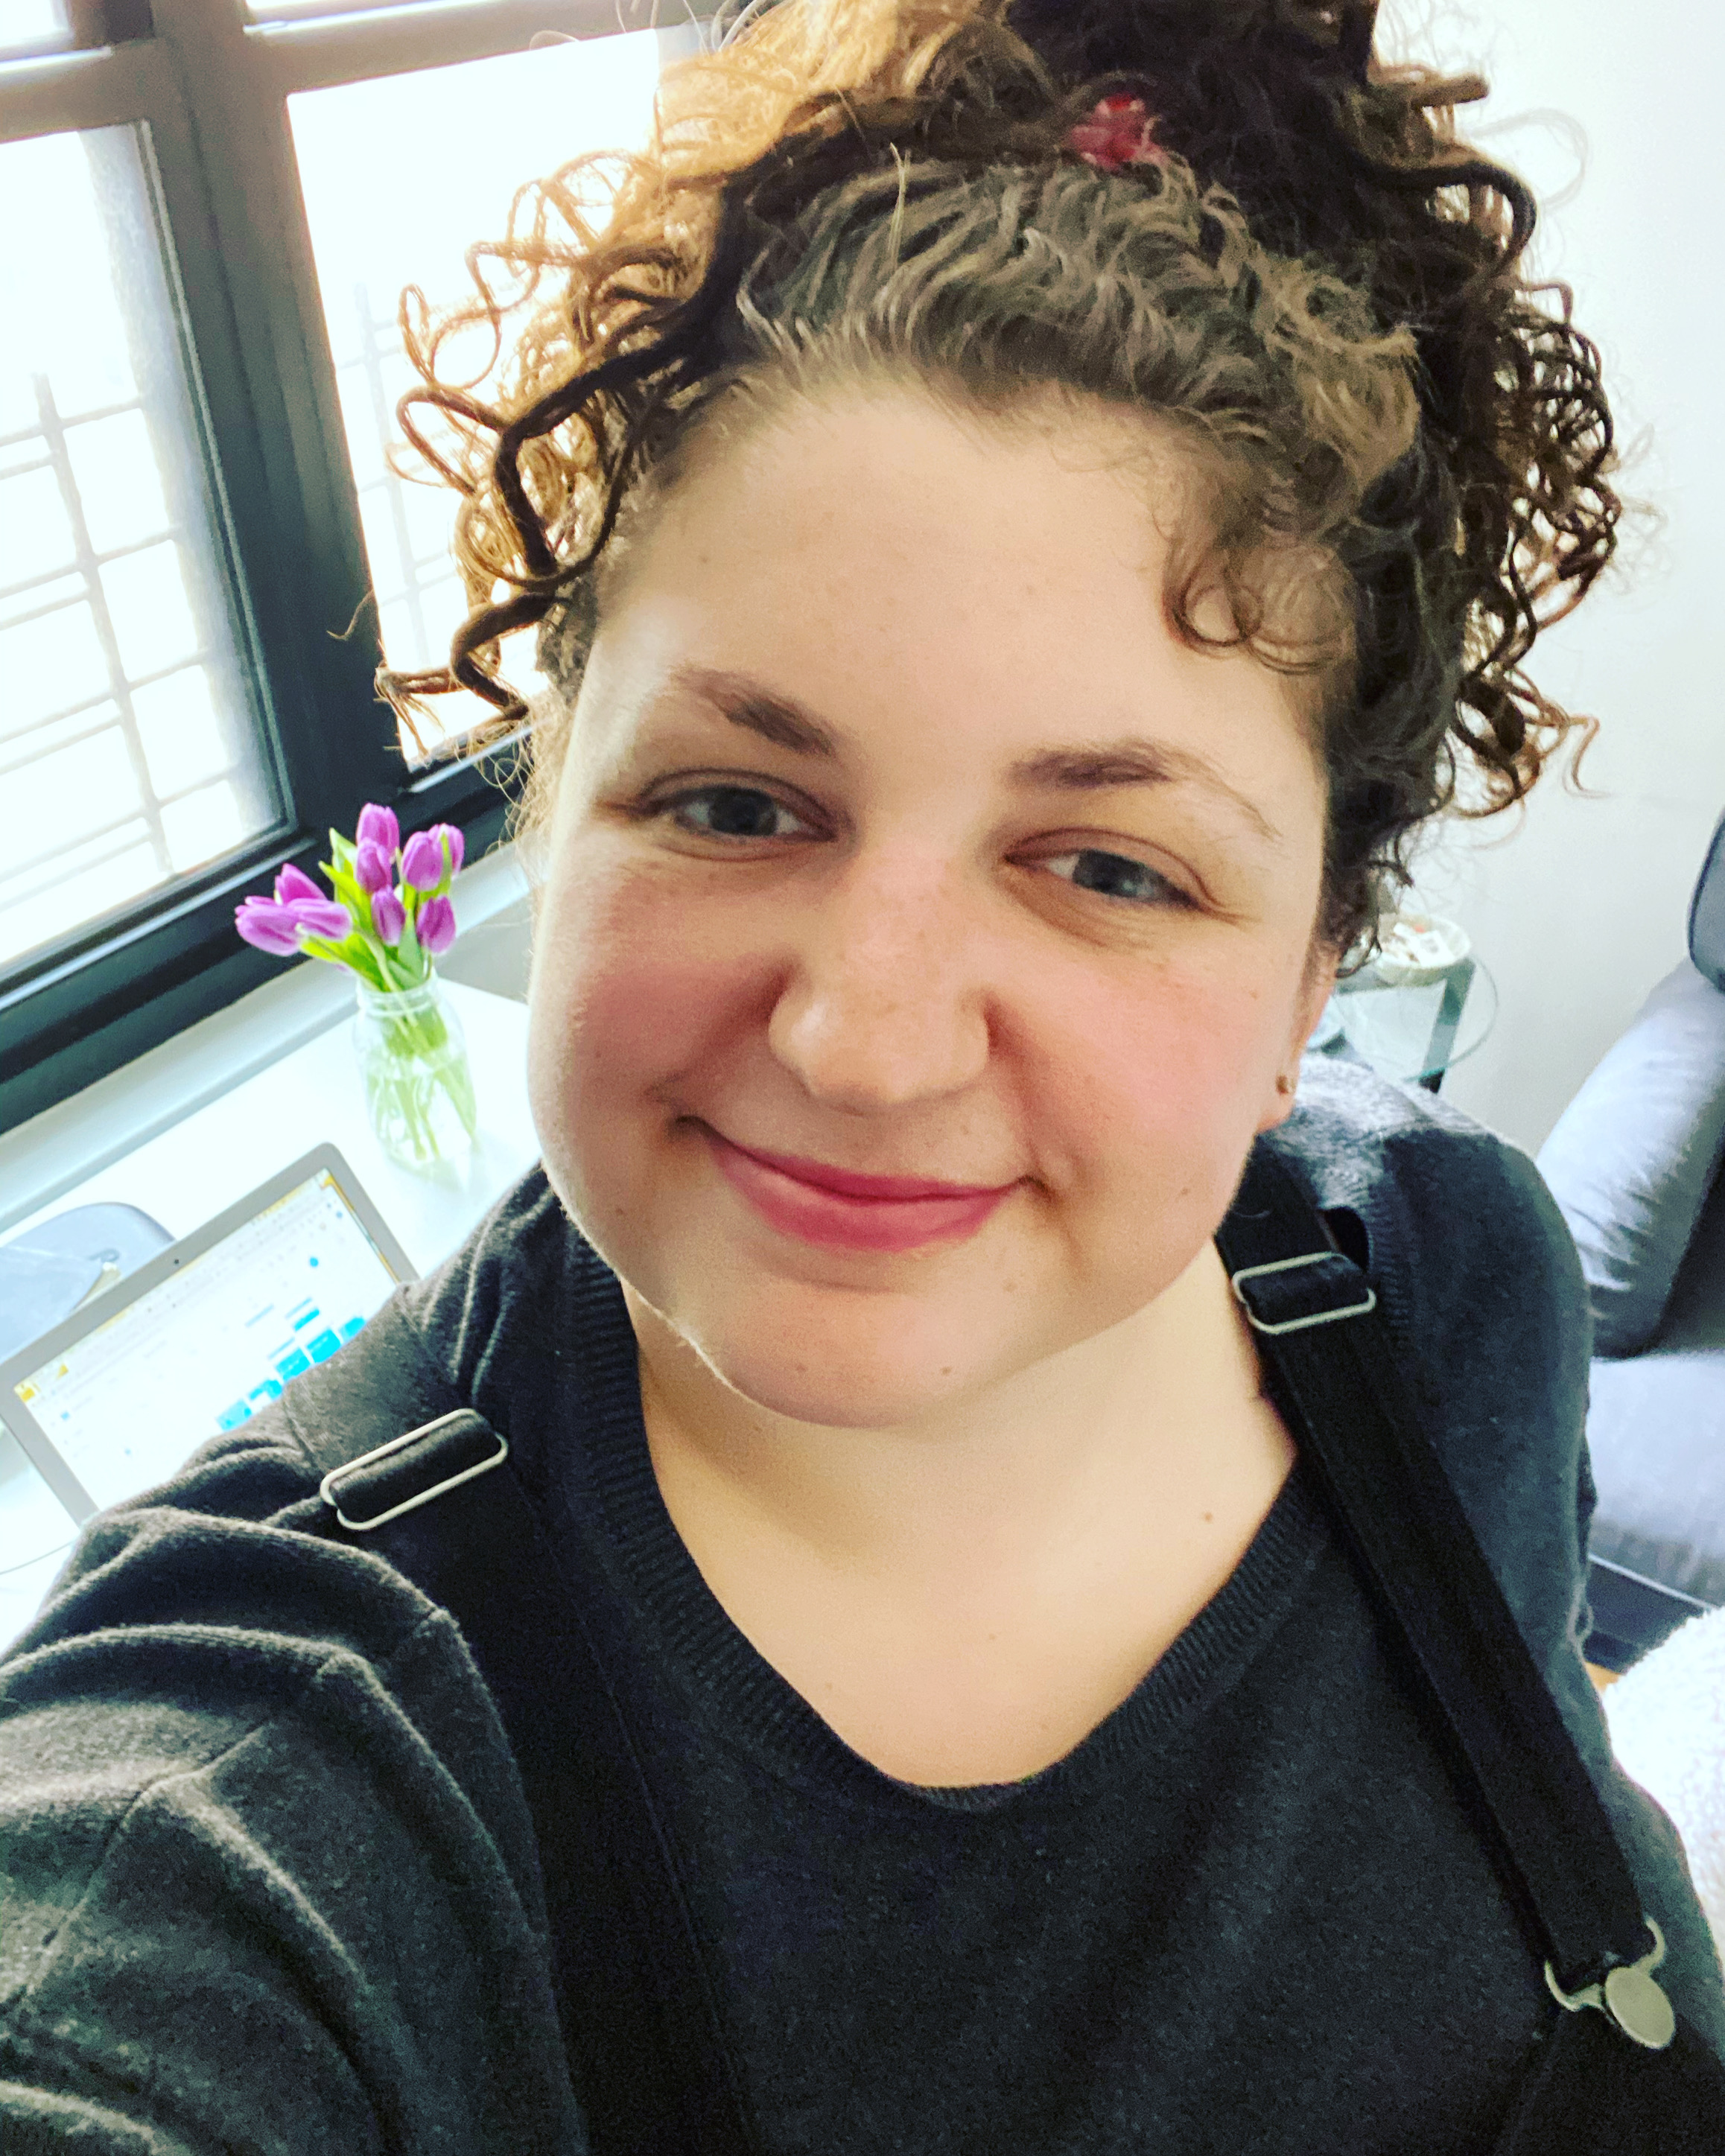 The Vulnerability of Starting a Business – Guest Post by Scrunchie Club Founder Alyssa Kaplan